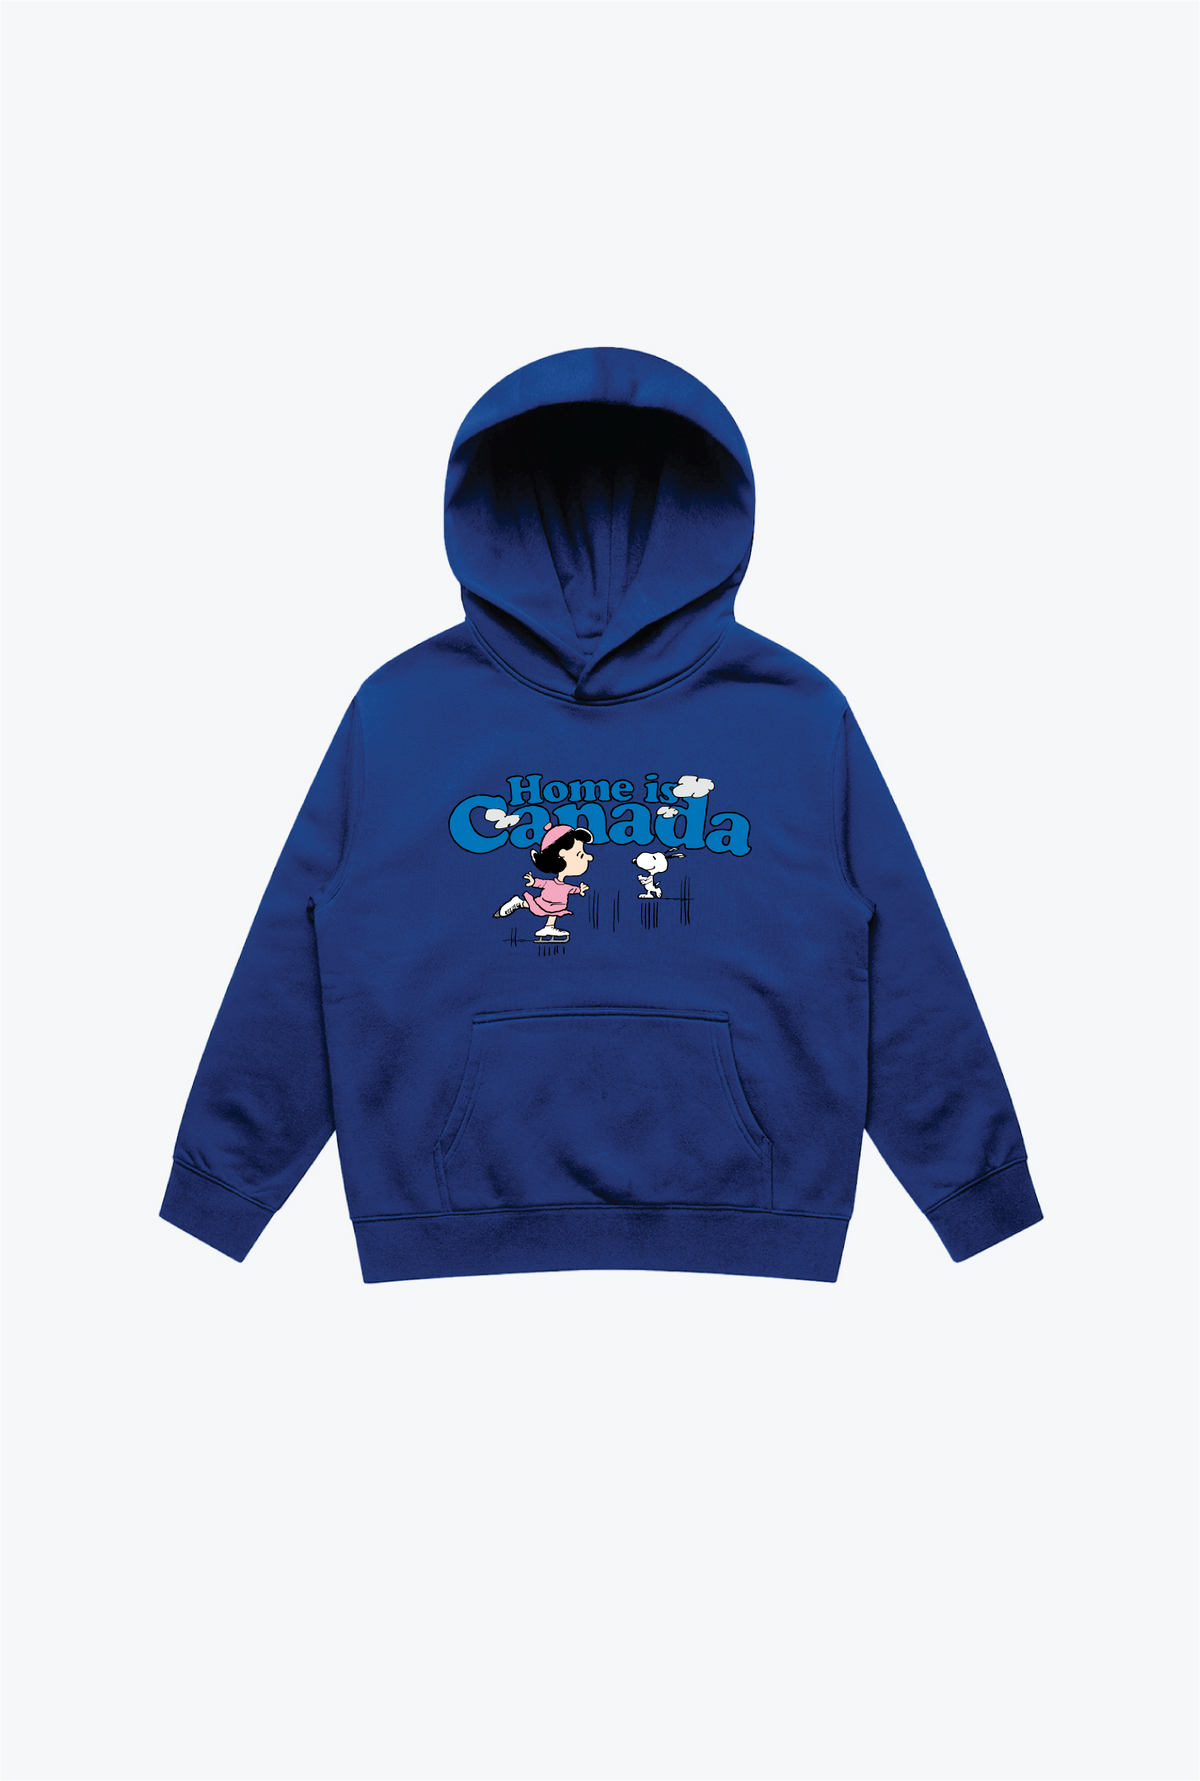 P/C x Peanuts Home is Canada Lucy Hoodie - Royal